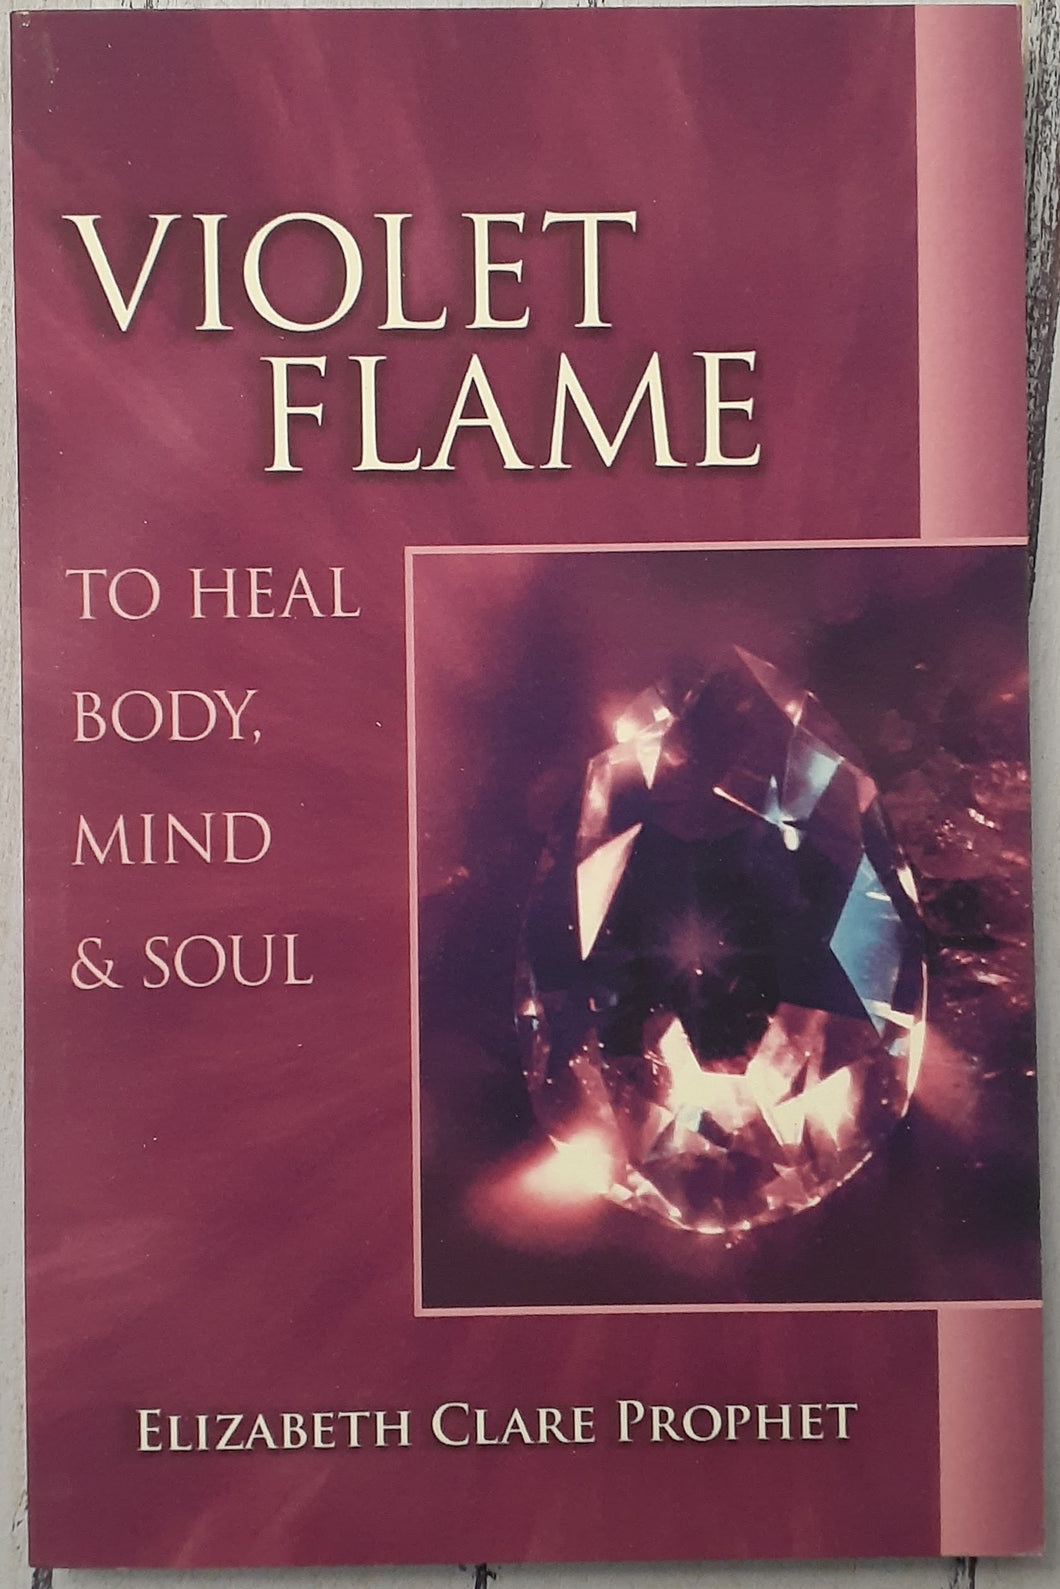 Violet Flame - To Heal Body, Mind & Soul